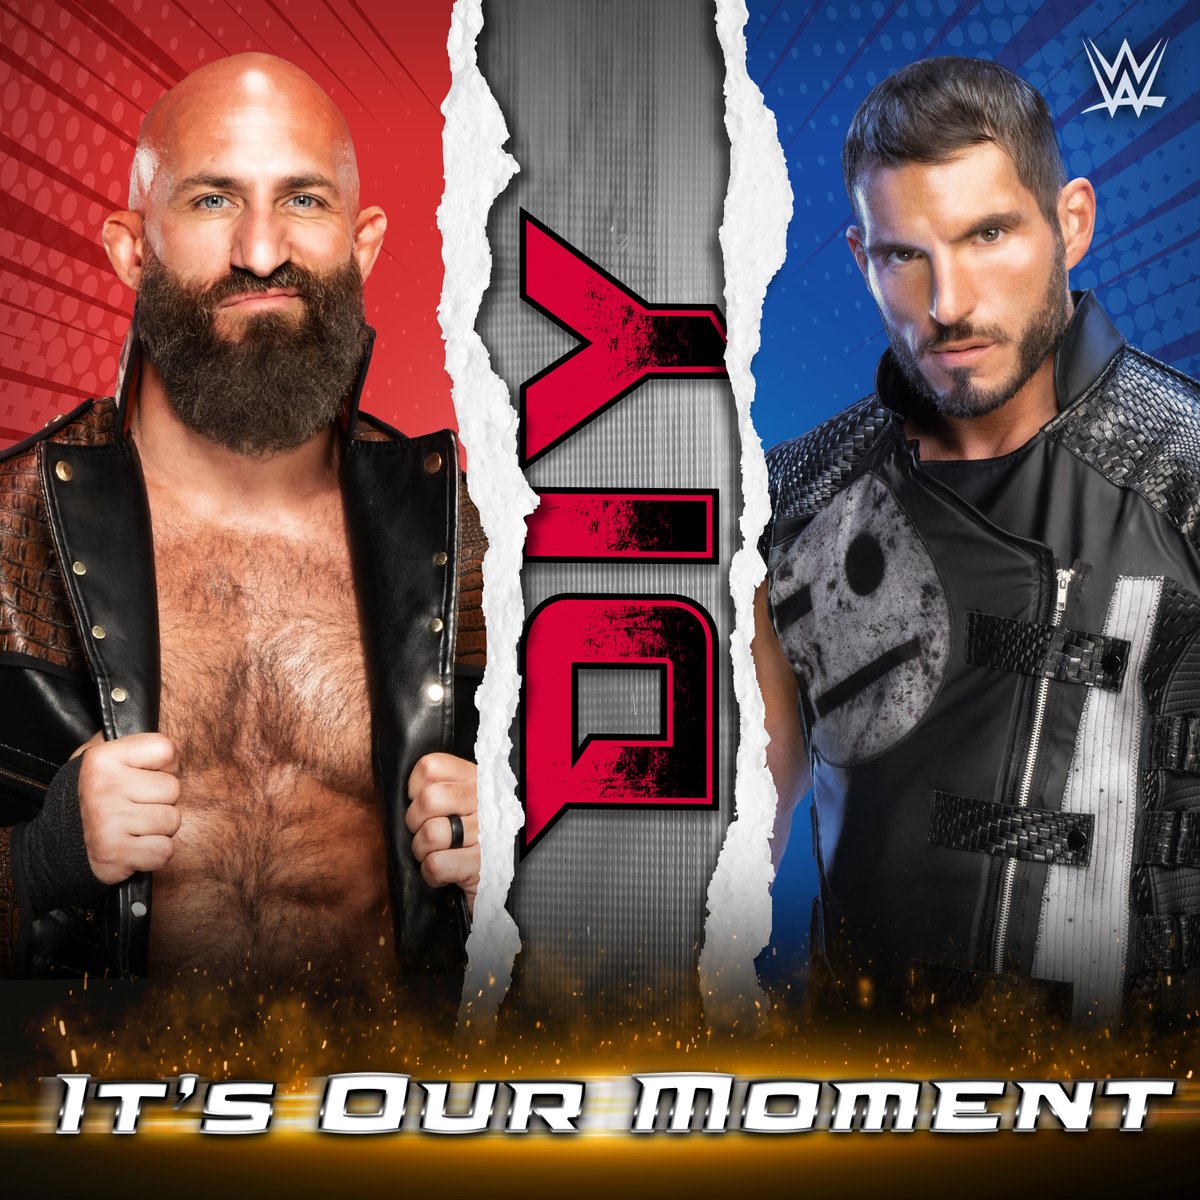 Onward and Upward. Listen to DIY’s theme “It’s Our Moment” on your favorite music service: linktr.ee/wwemusic @JohnnyGargano @CiampaWWE